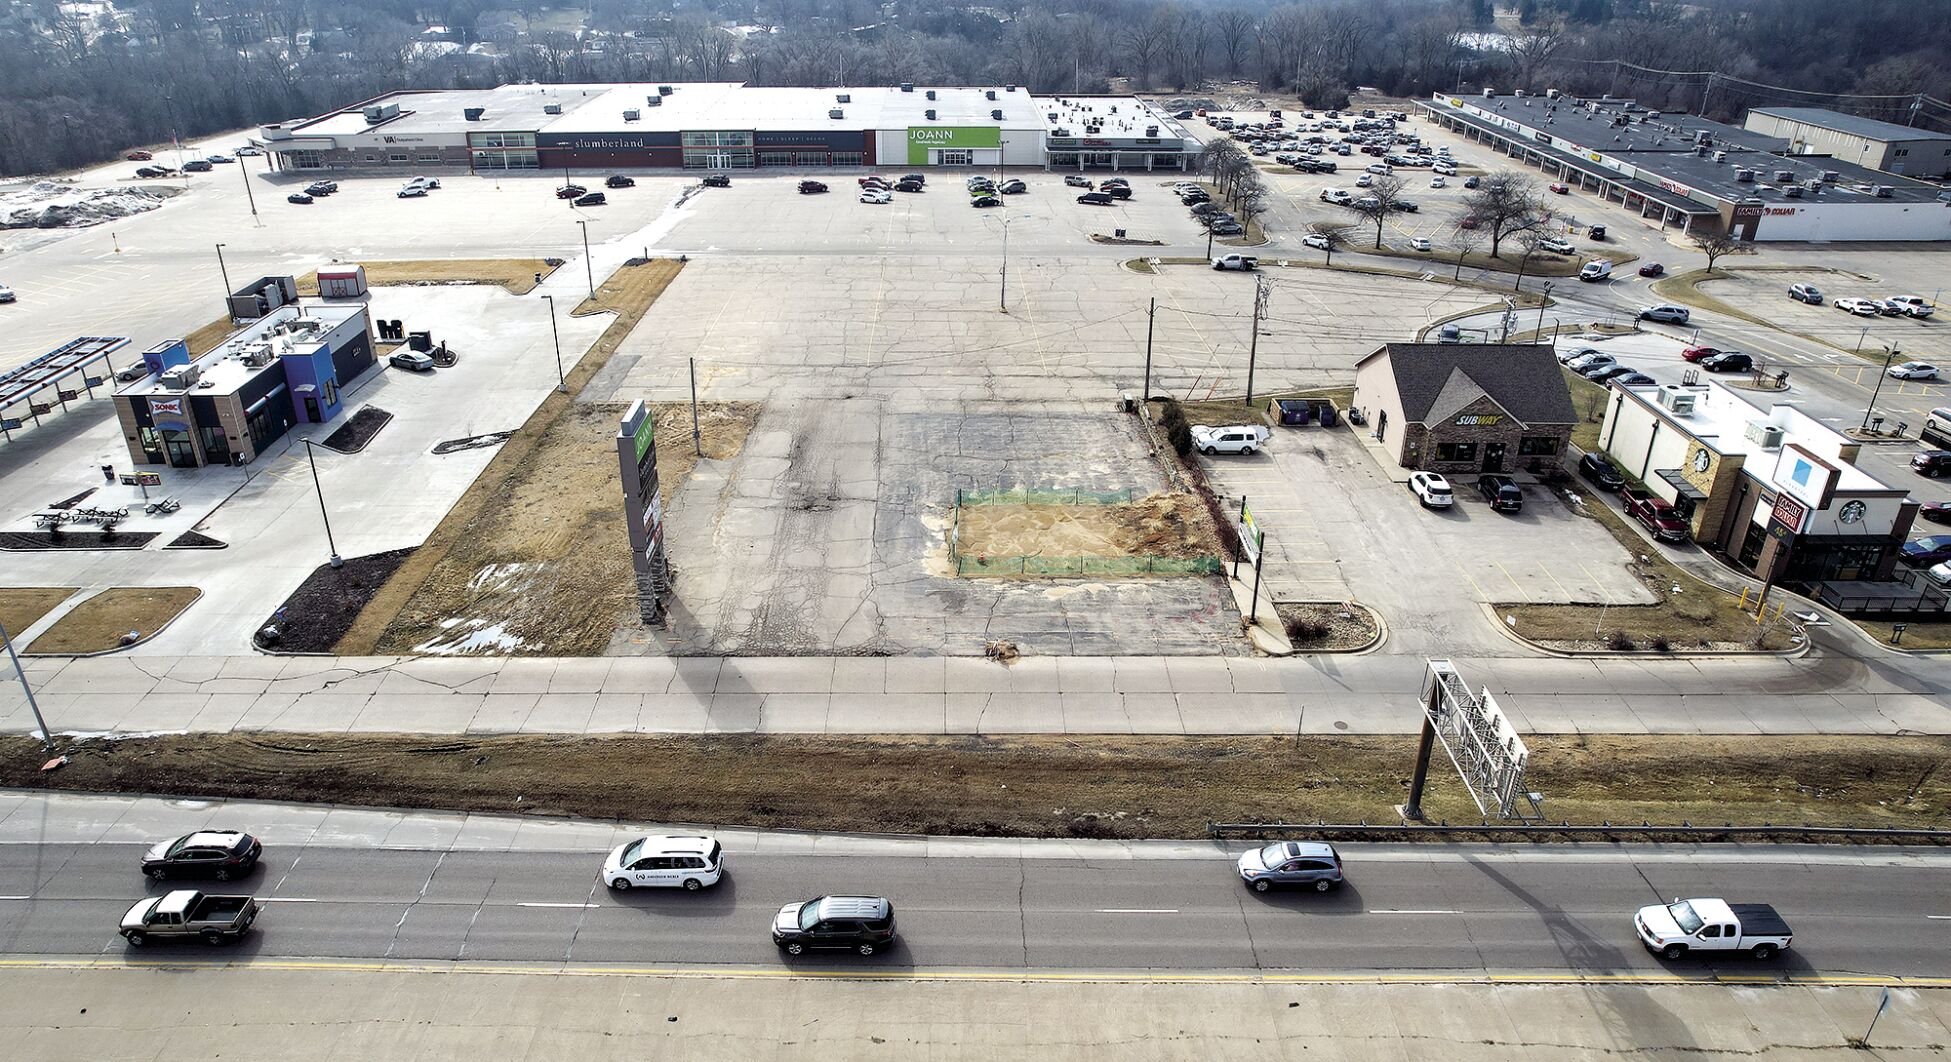 Aldi is planning a new supermarket between Sonic (left) and Starbucks (far right) in Dubuque’s Plaza 20.    PHOTO CREDIT: Dave Kettering